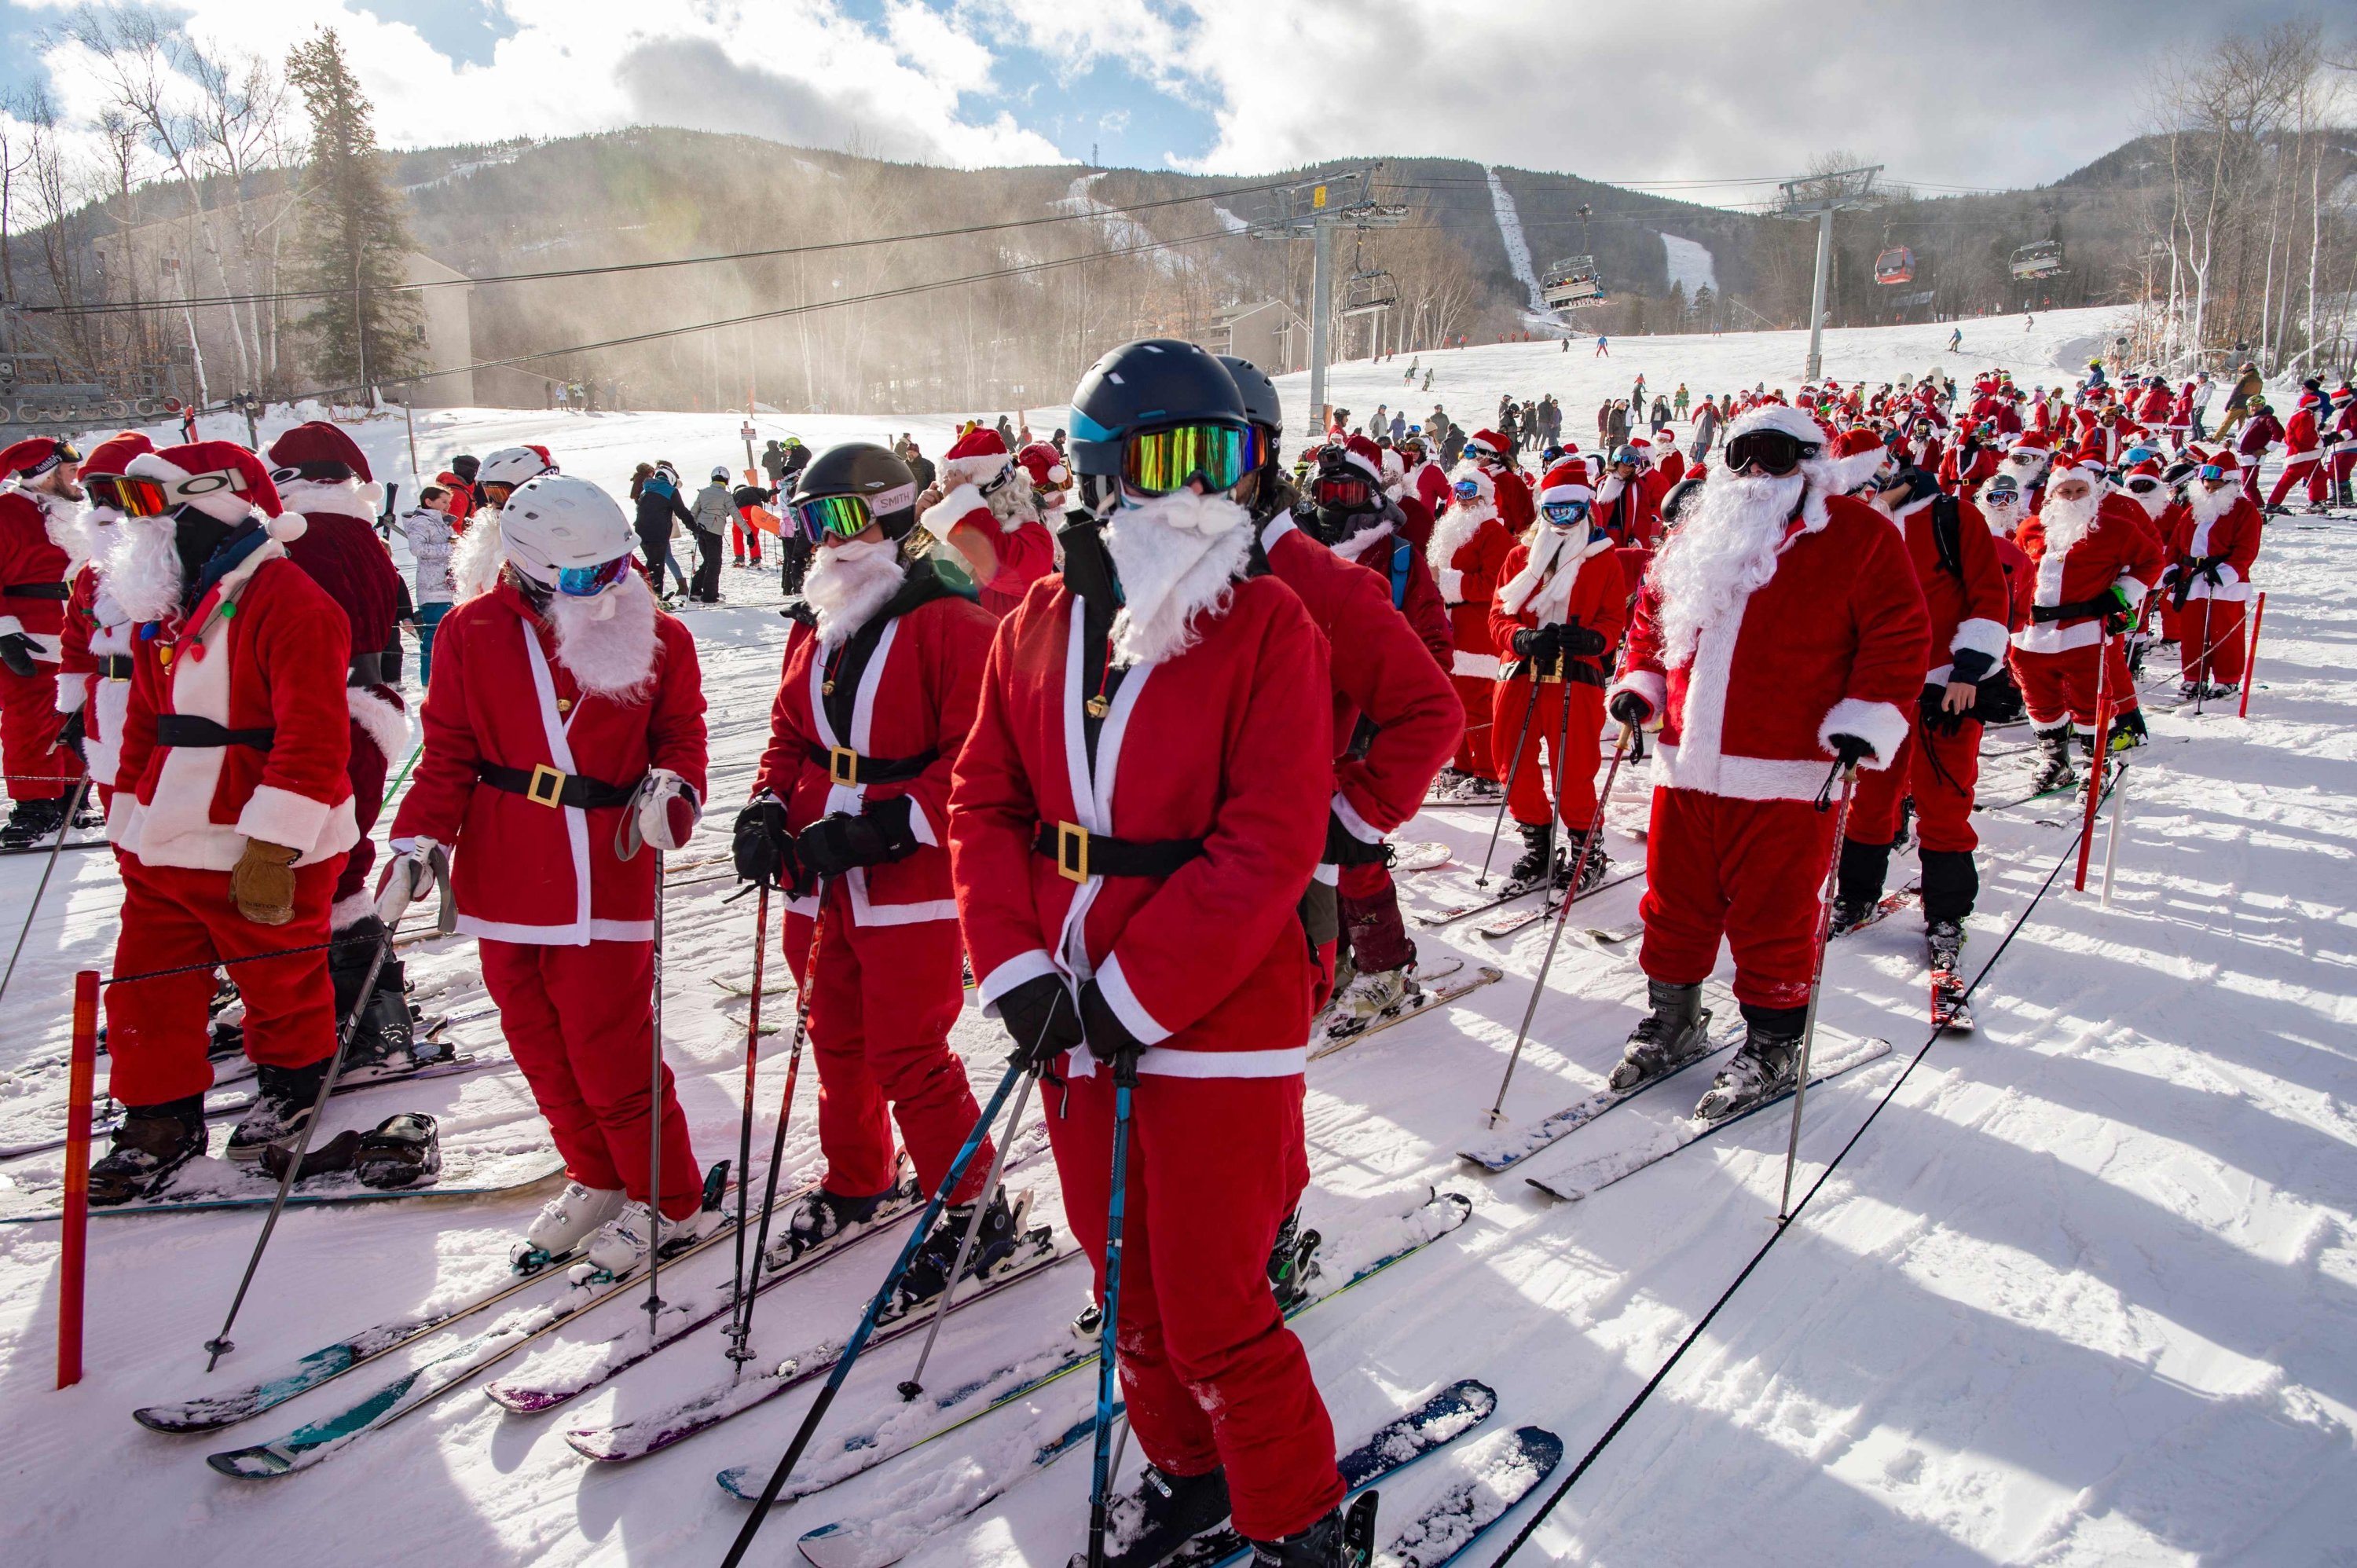 Skiers and snowboarders take part in the annual Santa Ski Run on Santa Sunday at Sunday River in Newry, Maine, U.S., Dec. 5, 2021. (AFP Photo)